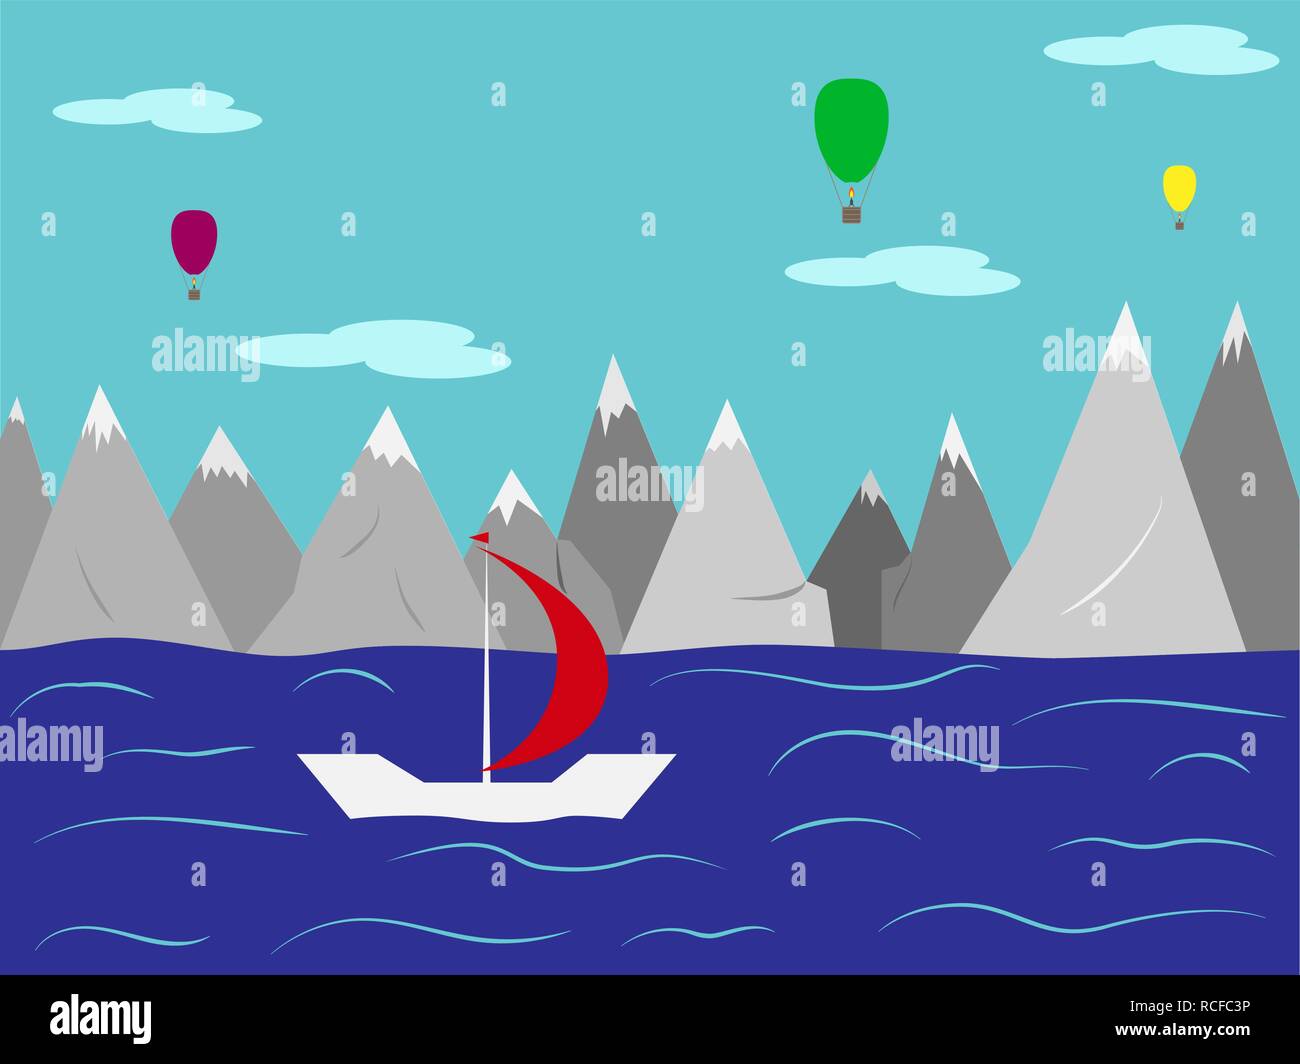 Landscape. Yacht with a red sail in the sea against the mountains with snow-capped peaks and balloons in the sky Stock Vector